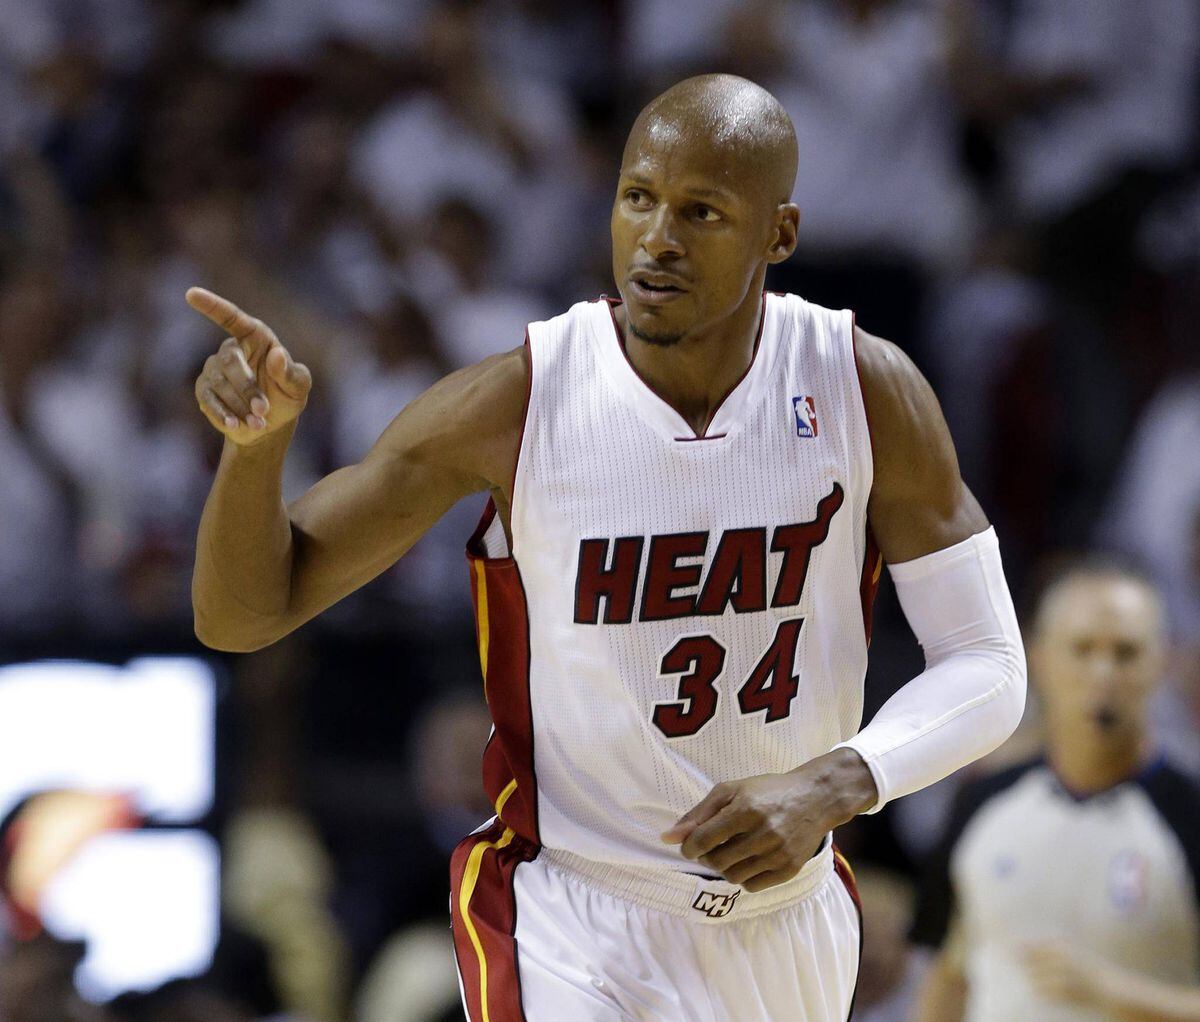 Ray Allen, the NBA’s all-time leader in 3-point shots made, retires - The Globe and Mail